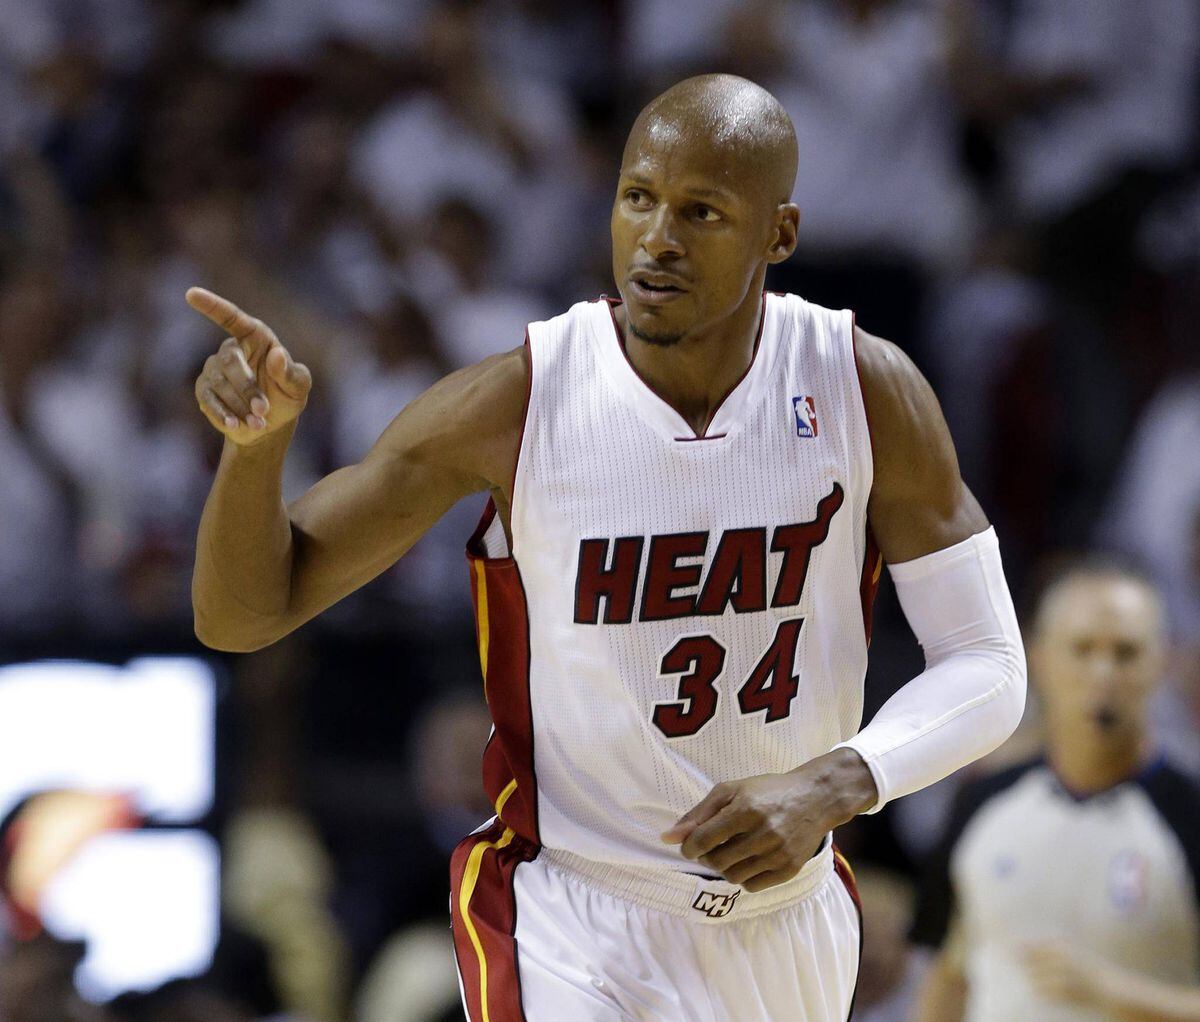 Ray Allen, the NBA’s all-time leader in 3-point shots made, retires - The Globe and Mail